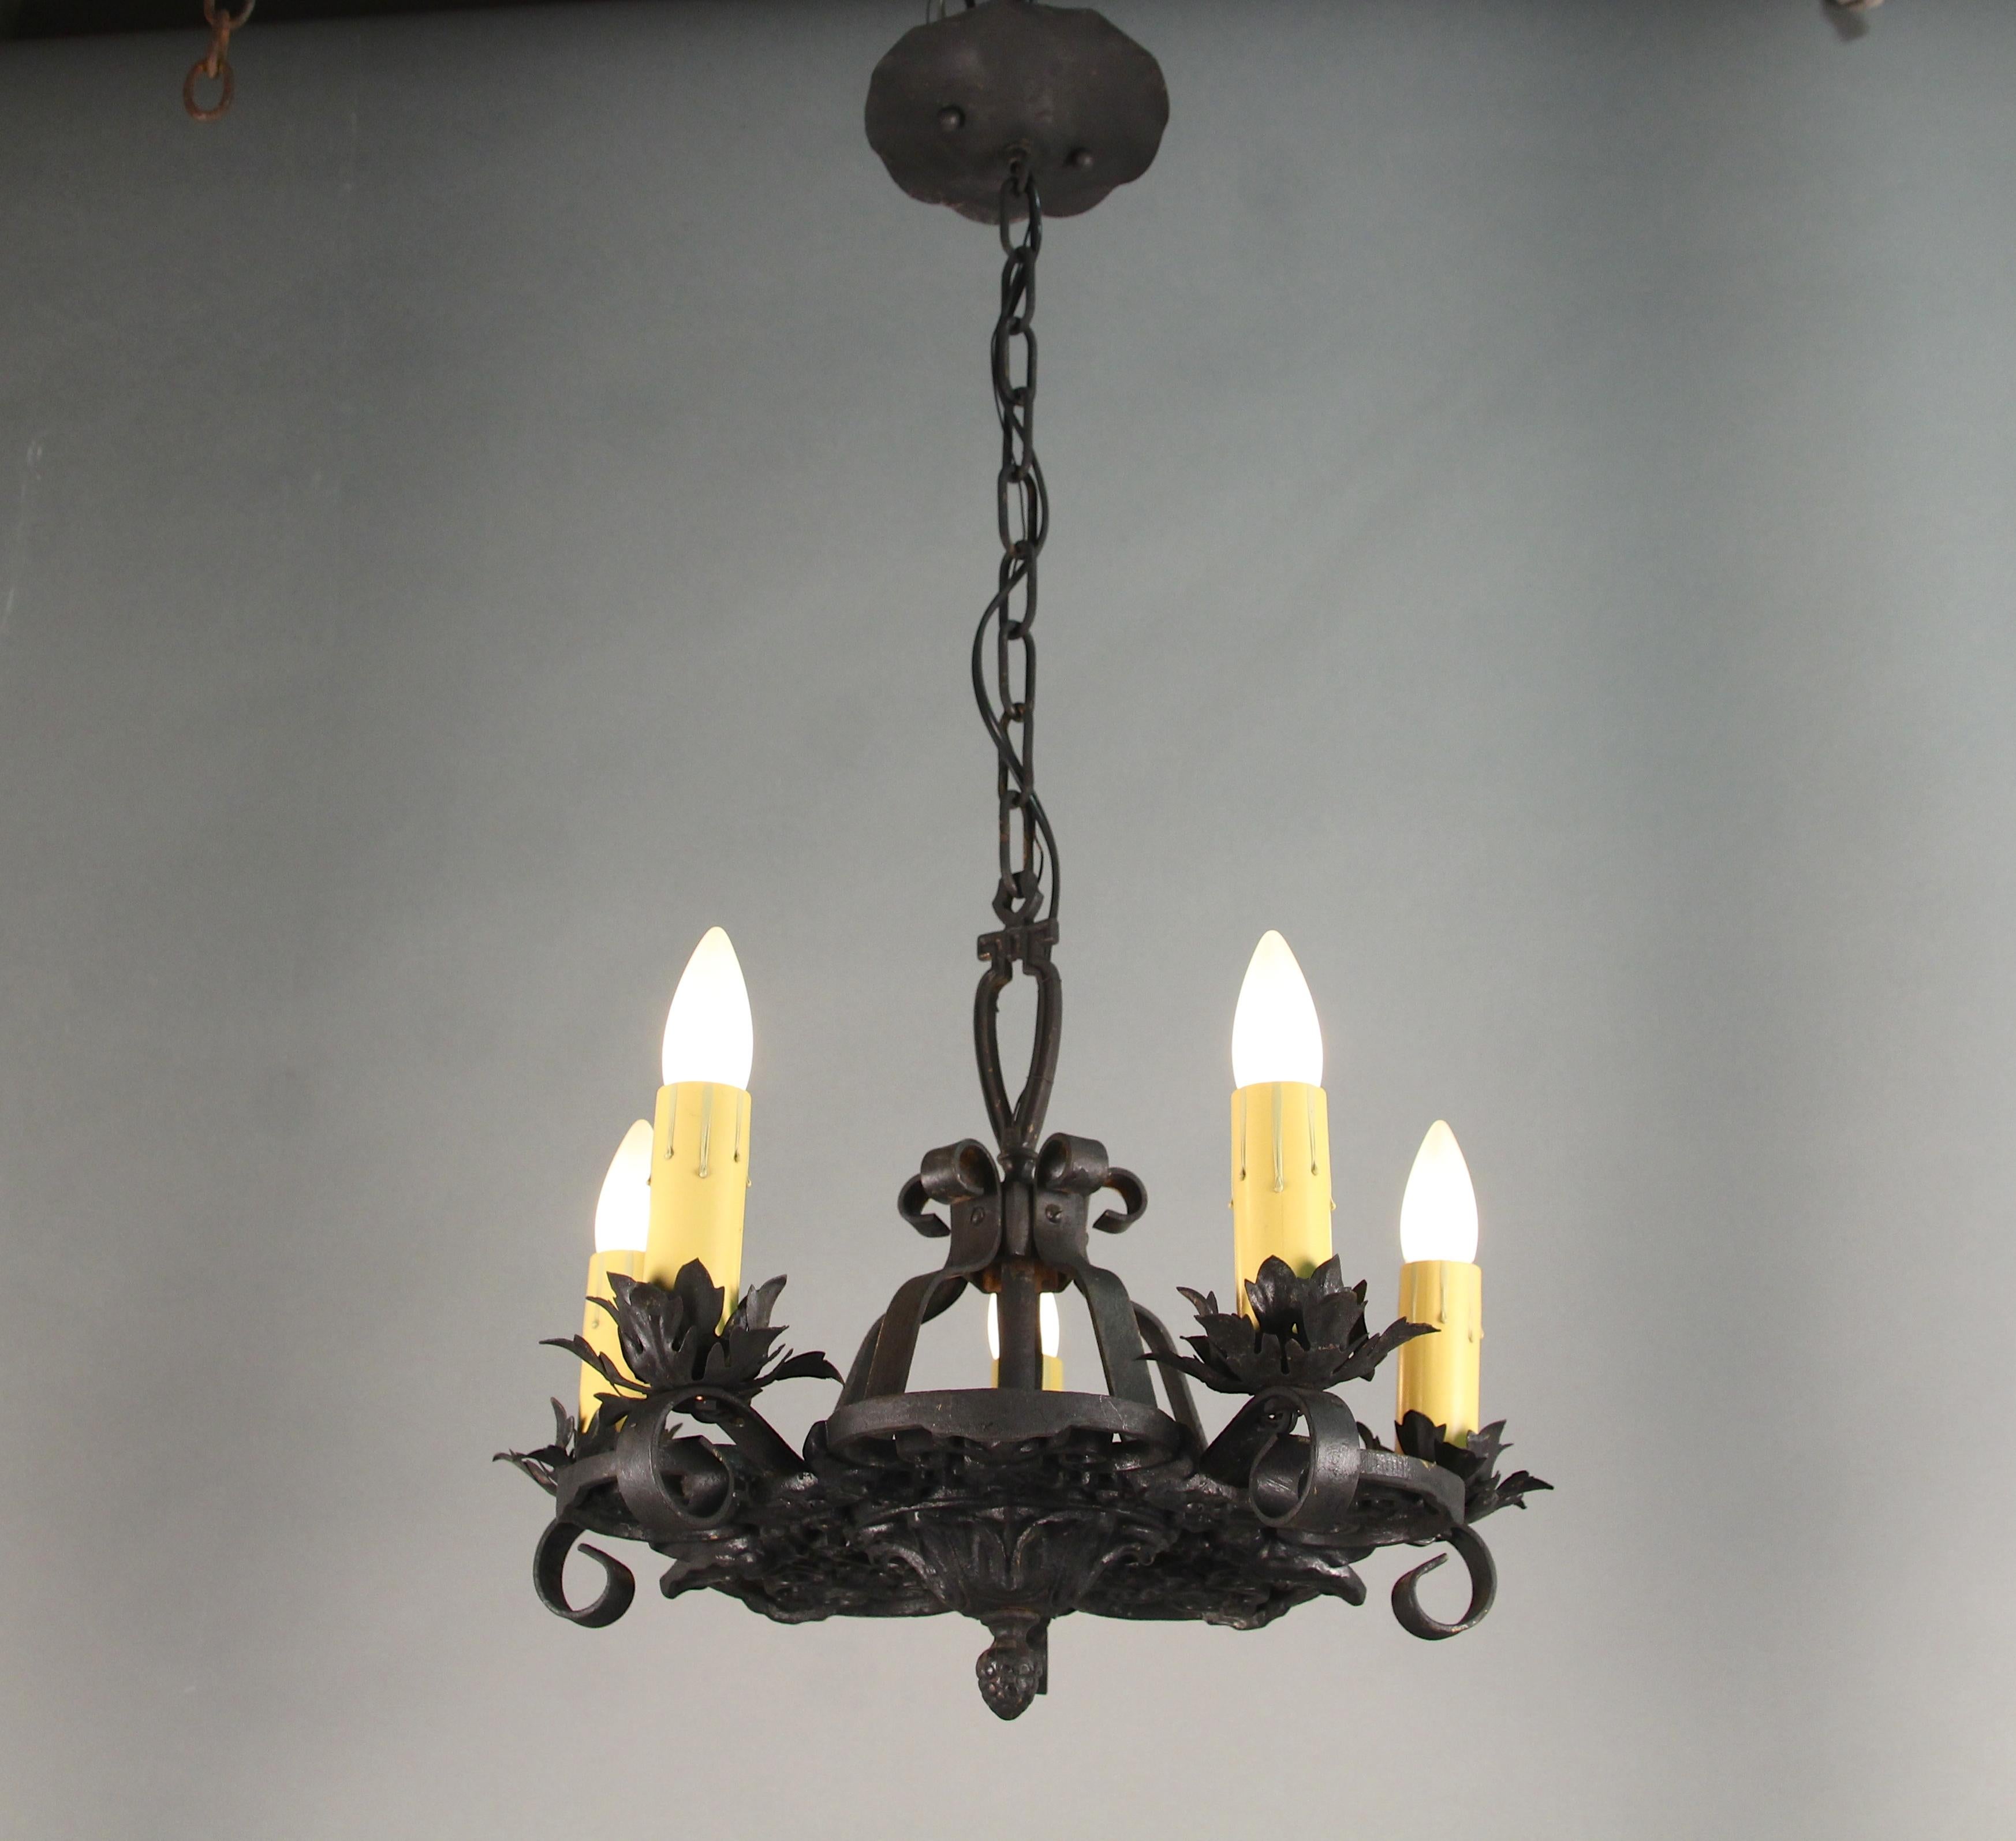 5-light chandelier with acanthus leafs, circa 1920s.